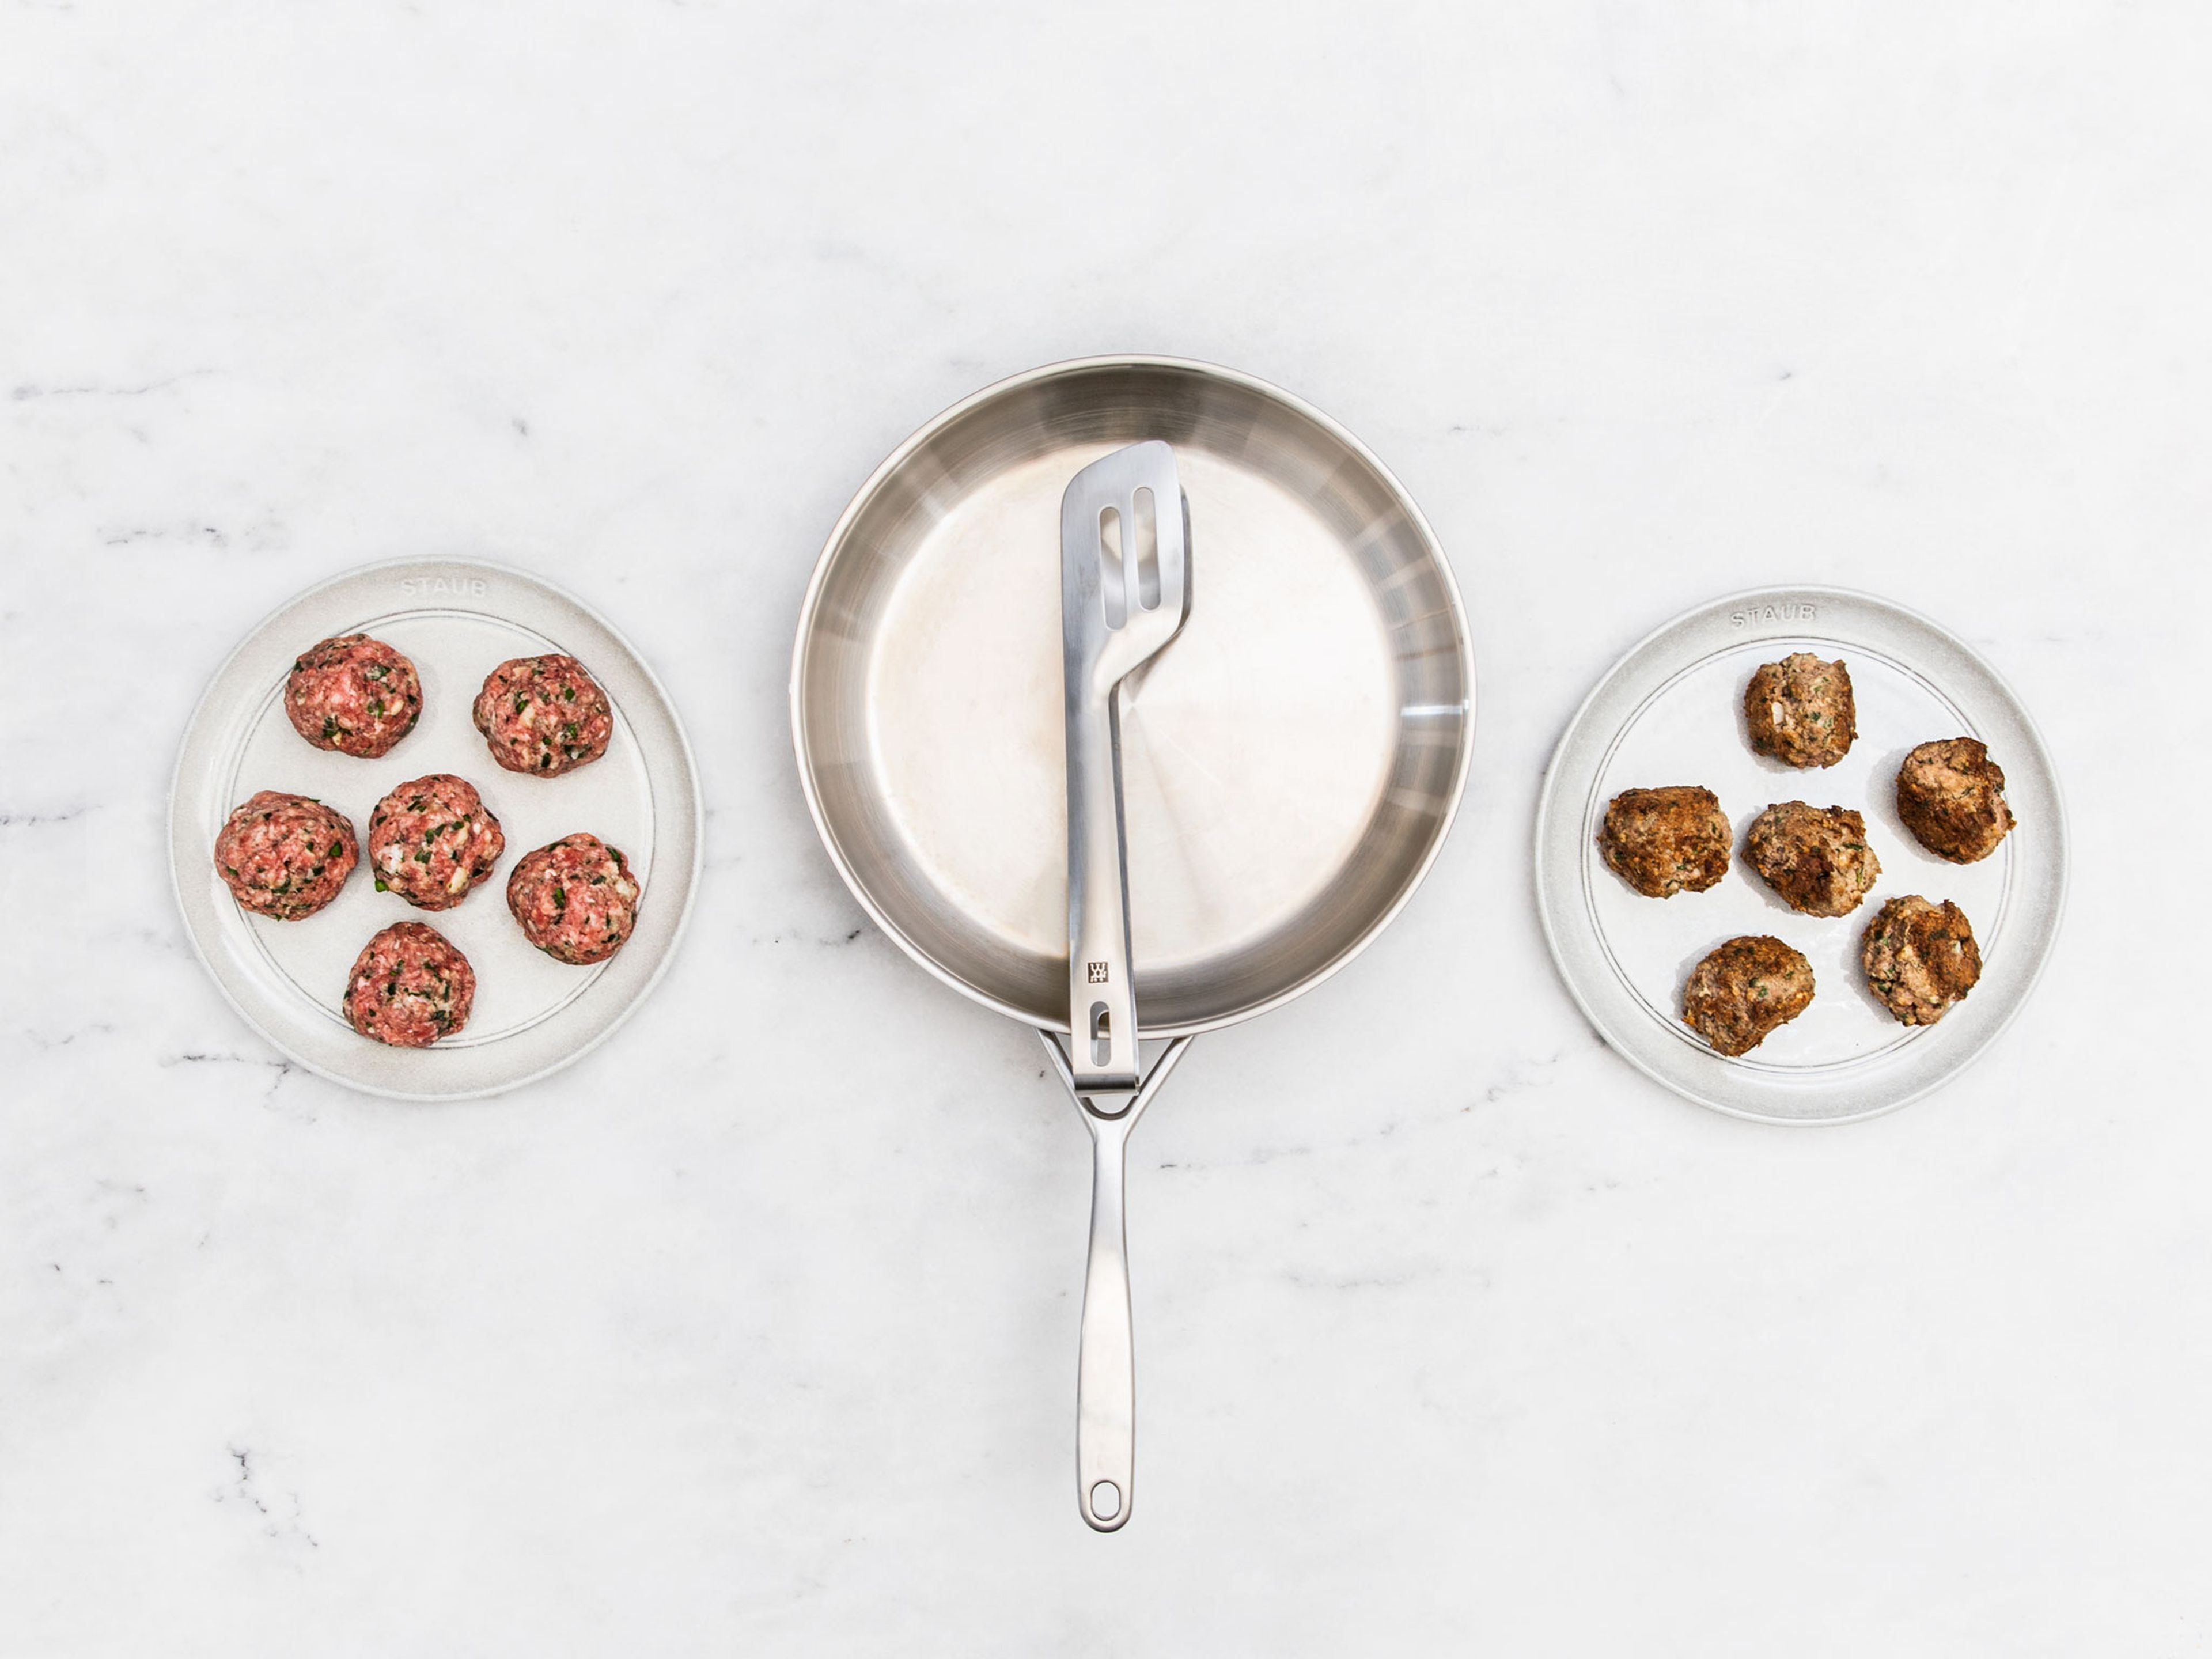 How to pan fry meatballs properly